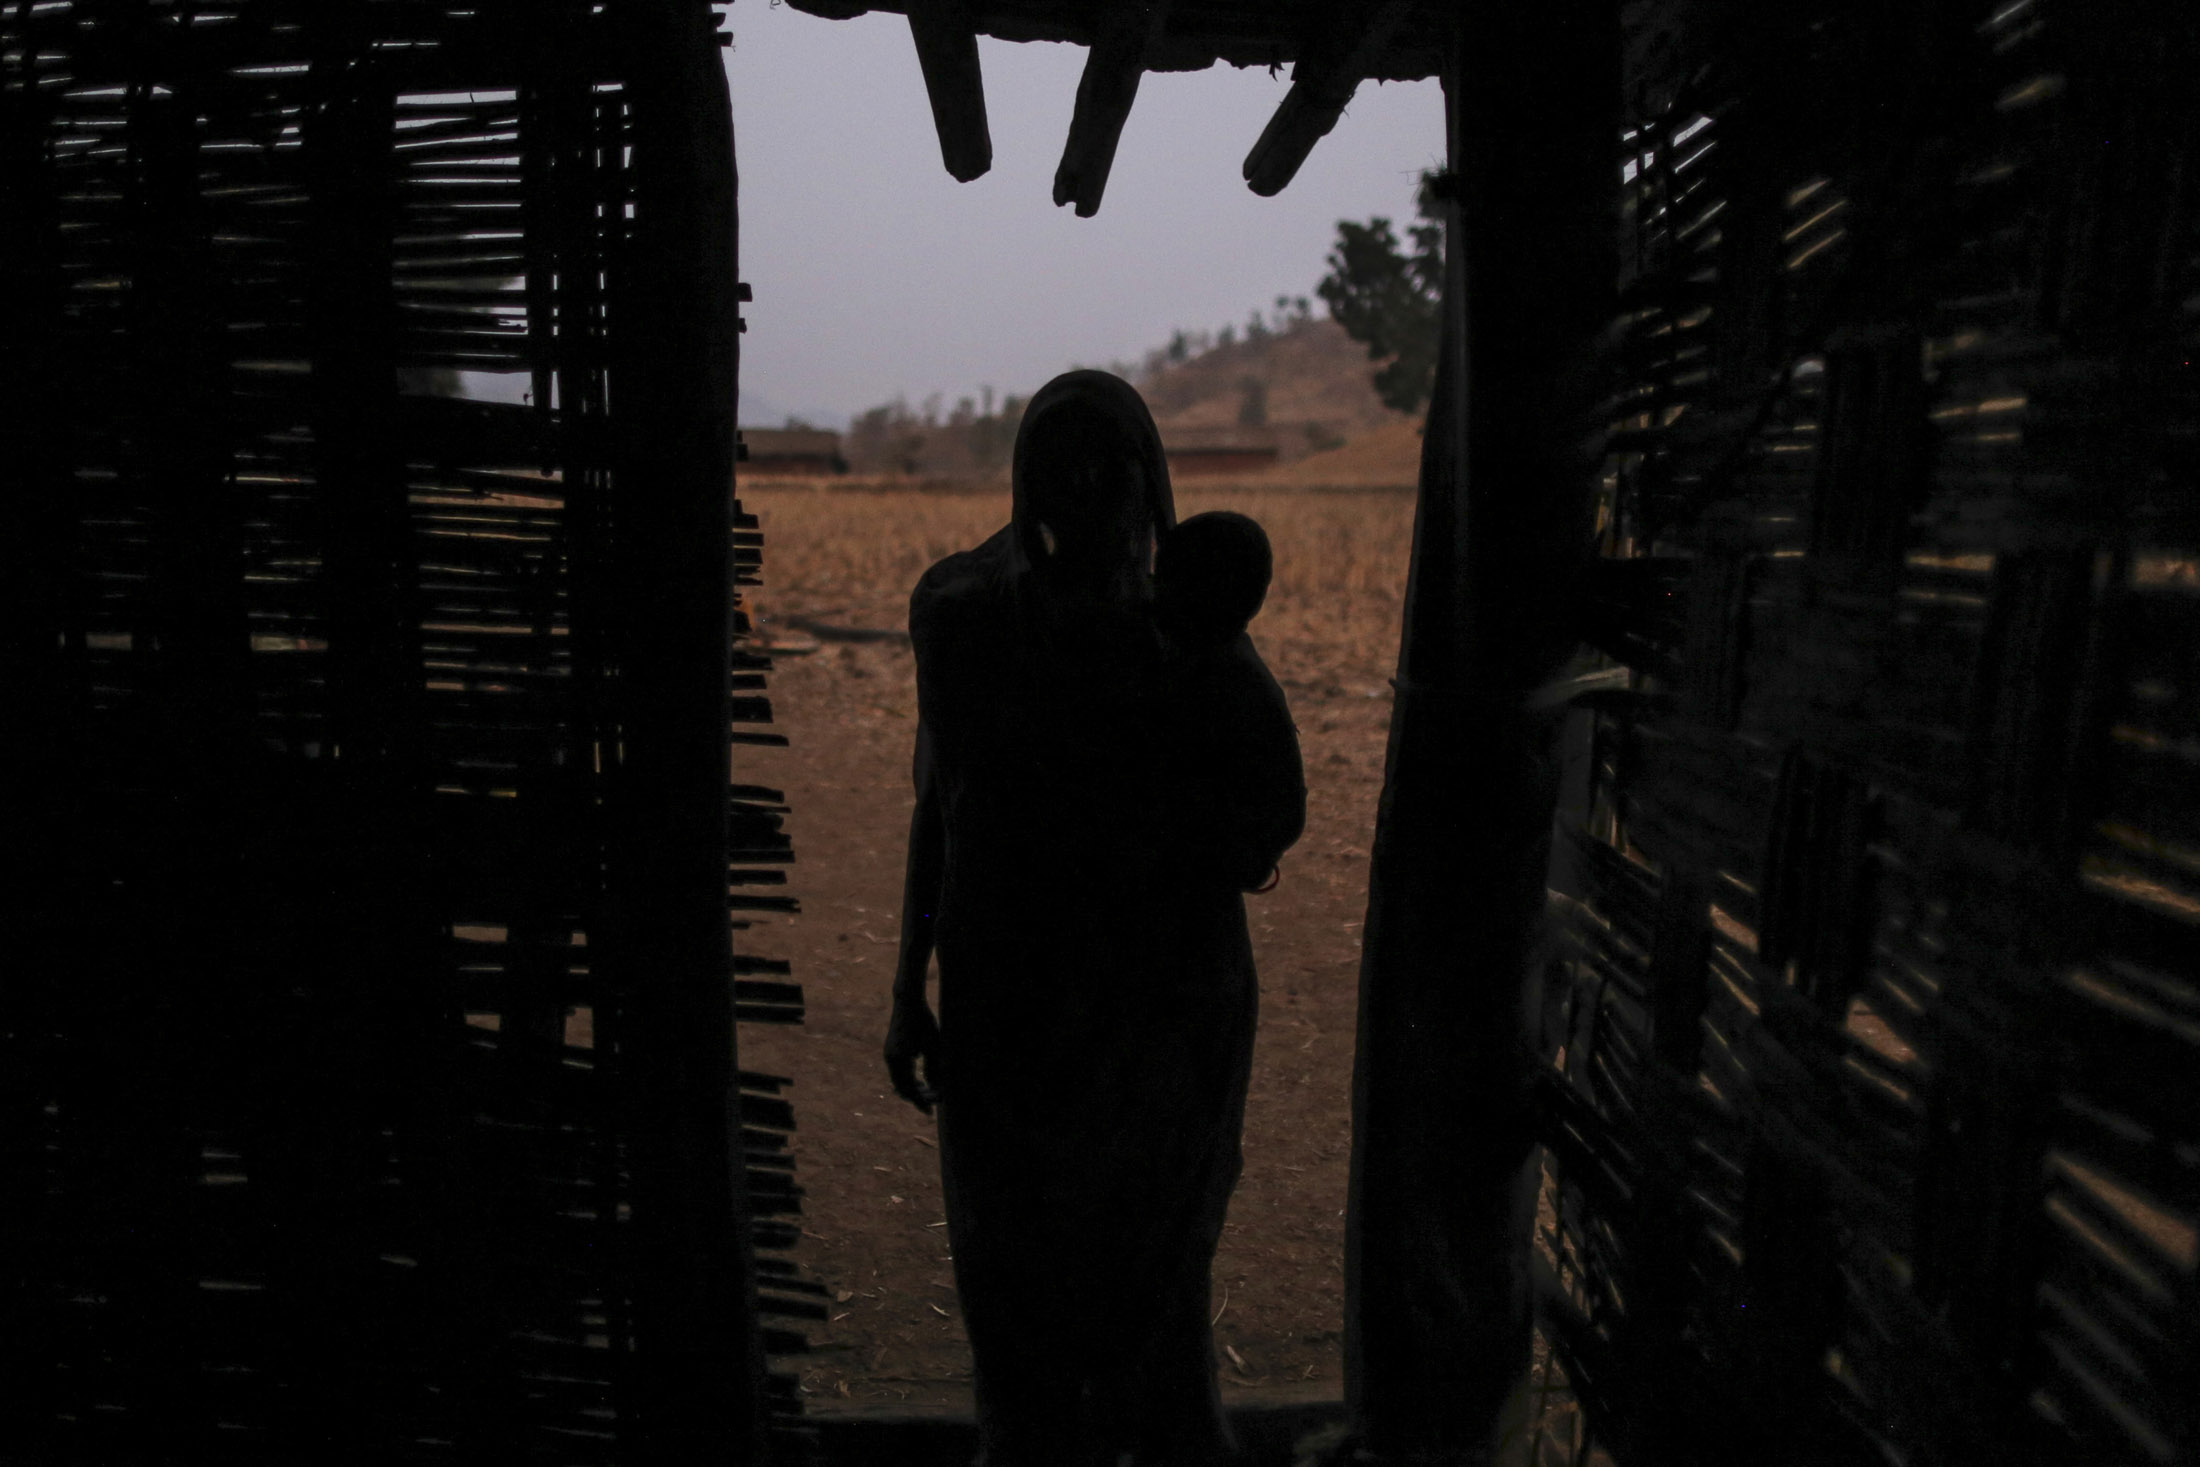 &nbsp;

A woman stands near her shack in Maharashtra's Bhamana village, where not a single home as access to electricity. More than 50 million homes are without power in India.
